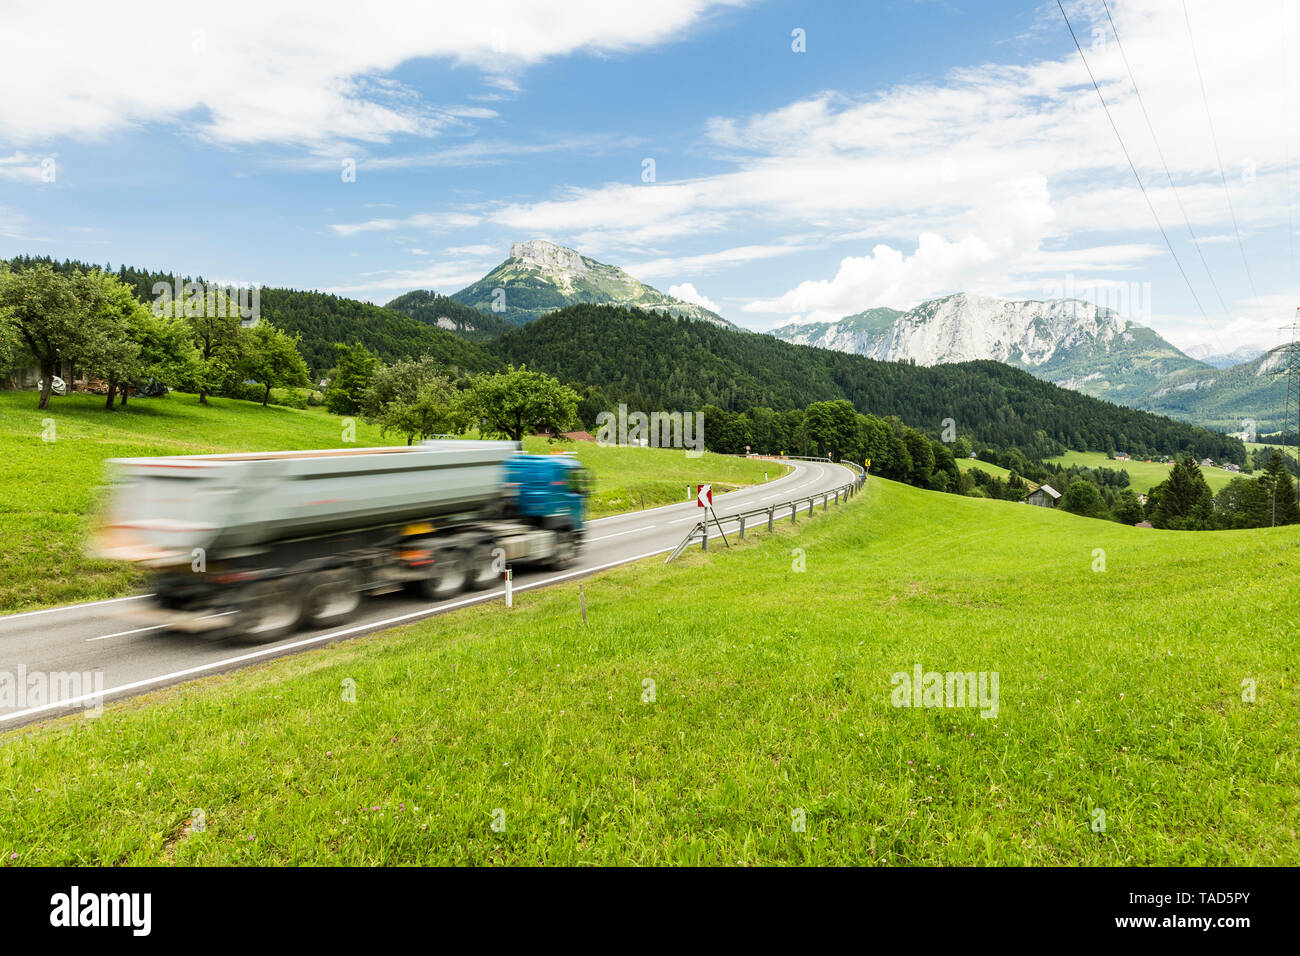 Austria, Styria, Loser window in the background, truck on federal highway Stock Photo